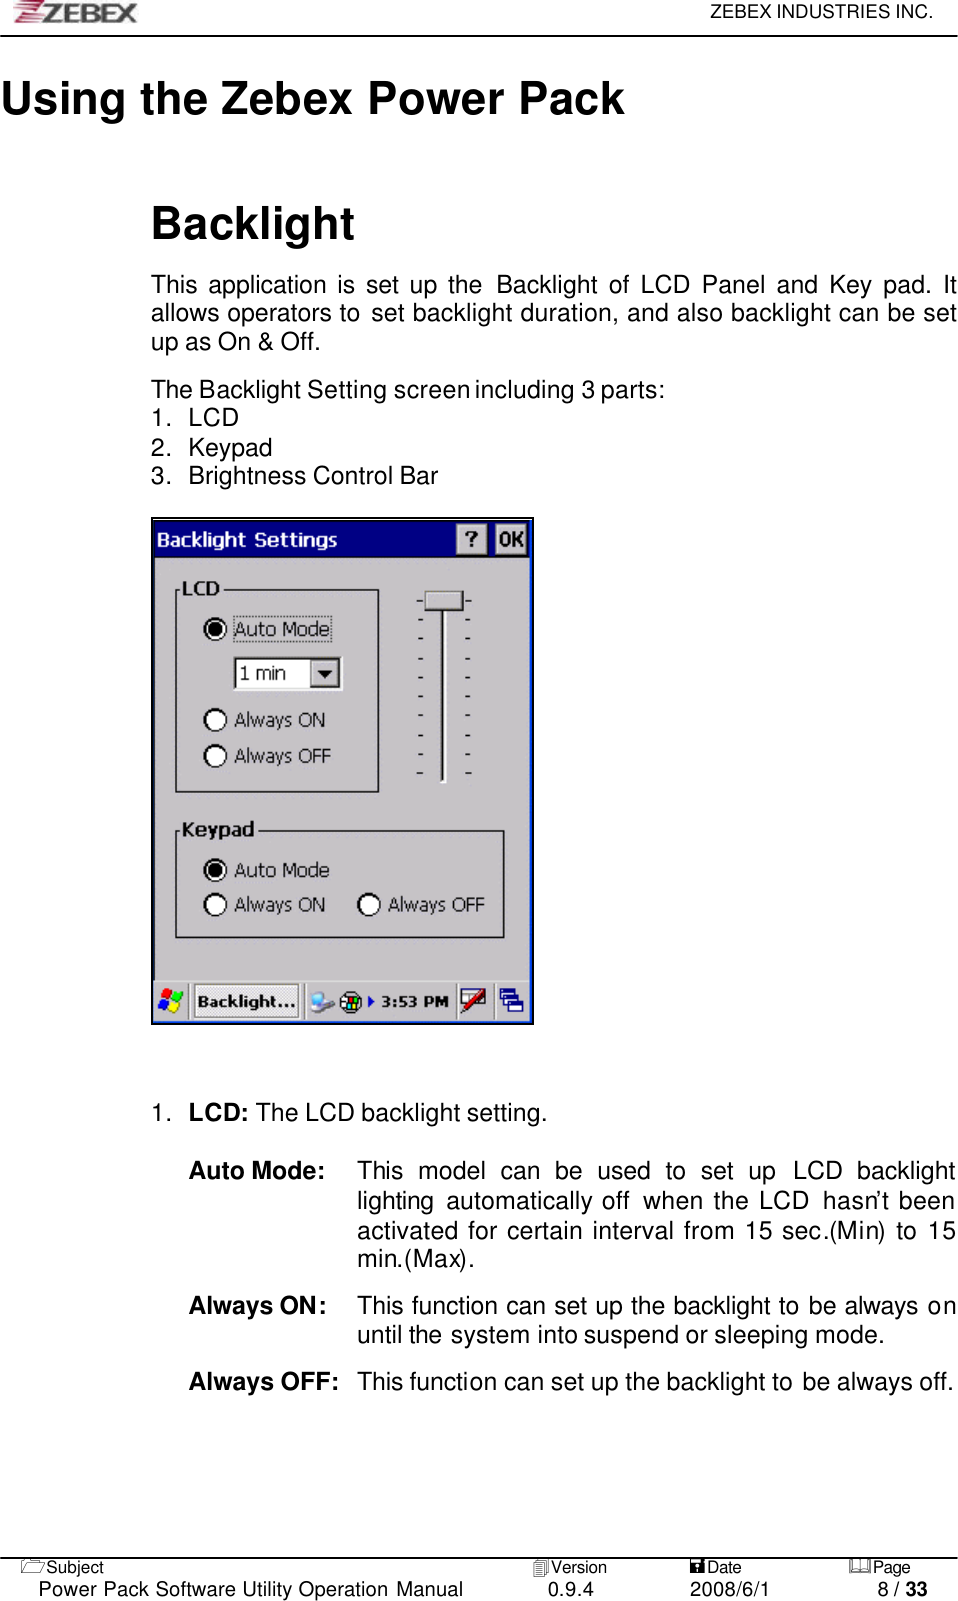     ZEBEX INDUSTRIES INC.   1Subject 4Version           =Date &amp;Page  Power Pack Software Utility Operation Manual 0.9.4    2008/6/1          8 / 33 Using the Zebex Power Pack    Backlight  This application is set up the Backlight  of LCD Panel and Key pad. It allows operators to set backlight duration, and also backlight can be set up as On &amp; Off.    The Backlight Setting screen including 3 parts: 1. LCD 2. Keypad 3. Brightness Control Bar      1. LCD: The LCD backlight setting.  Auto Mode:   This model can be used to set up LCD backlight lighting automatically off  when the LCD hasn’t been activated for certain interval from 15 sec.(Min) to 15 min.(Max).  Always ON:    This function can set up the backlight to be always on until the system into suspend or sleeping mode.  Always OFF:   This function can set up the backlight to be always off.       